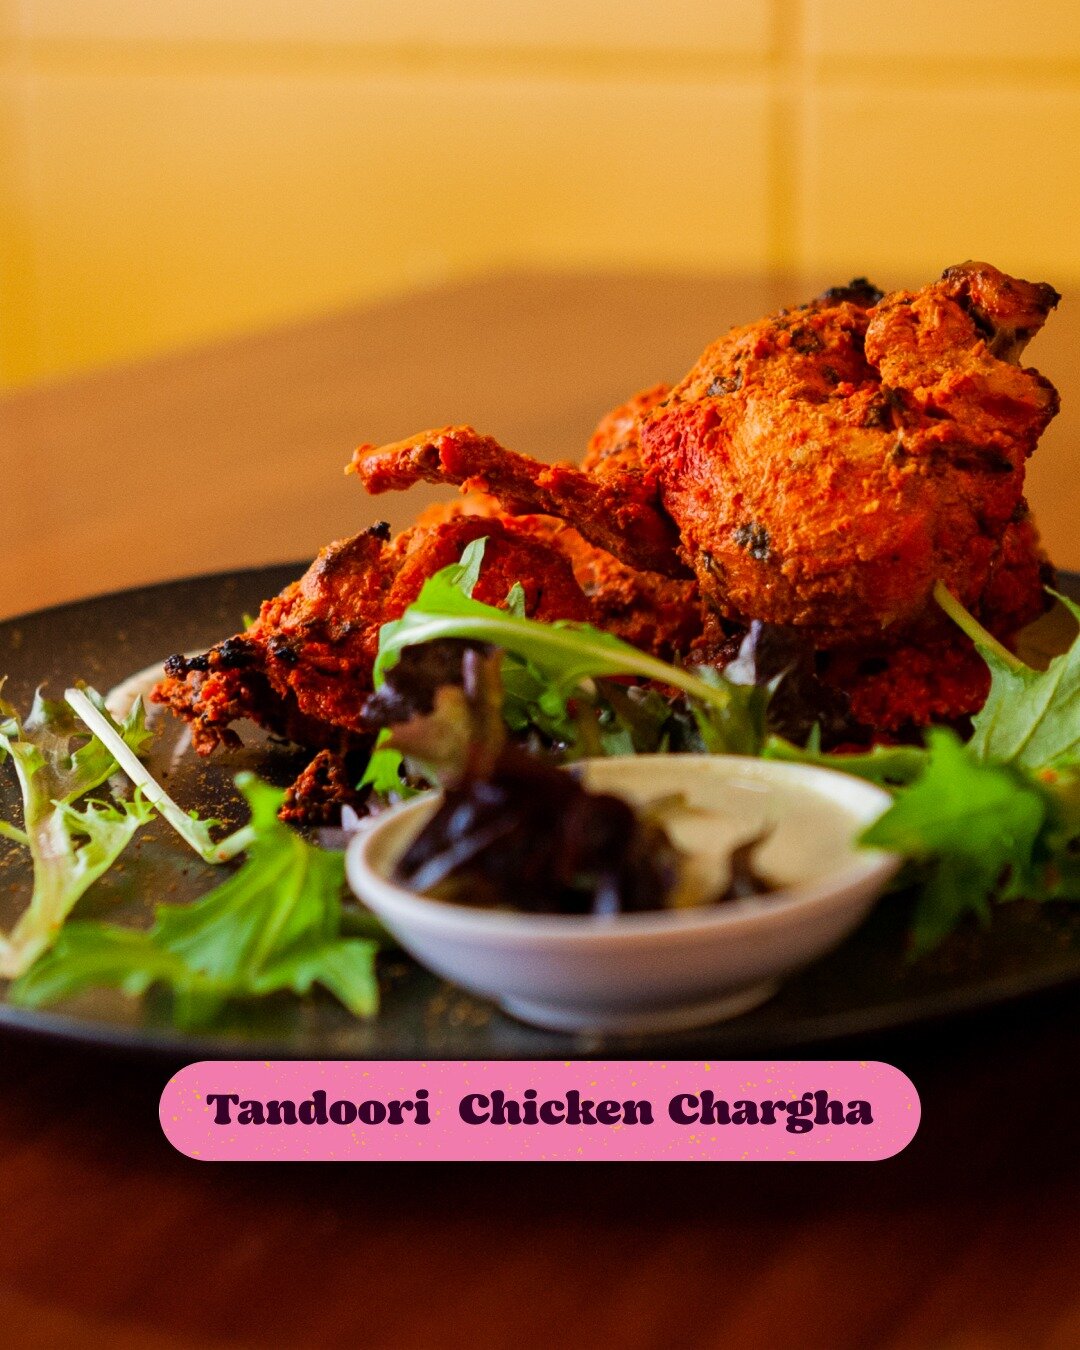 🍗 Get a taste of traditional Pakistani cuisine with our Tandoori Chargha. Juicy chicken marinated in aromatic spices, yoghurt, lemon and fresh herbs. 

#TandooriChargha #PakistaniCuisine #ChickenLover #FoodieHeaven #TandooriDelight

Order online or 